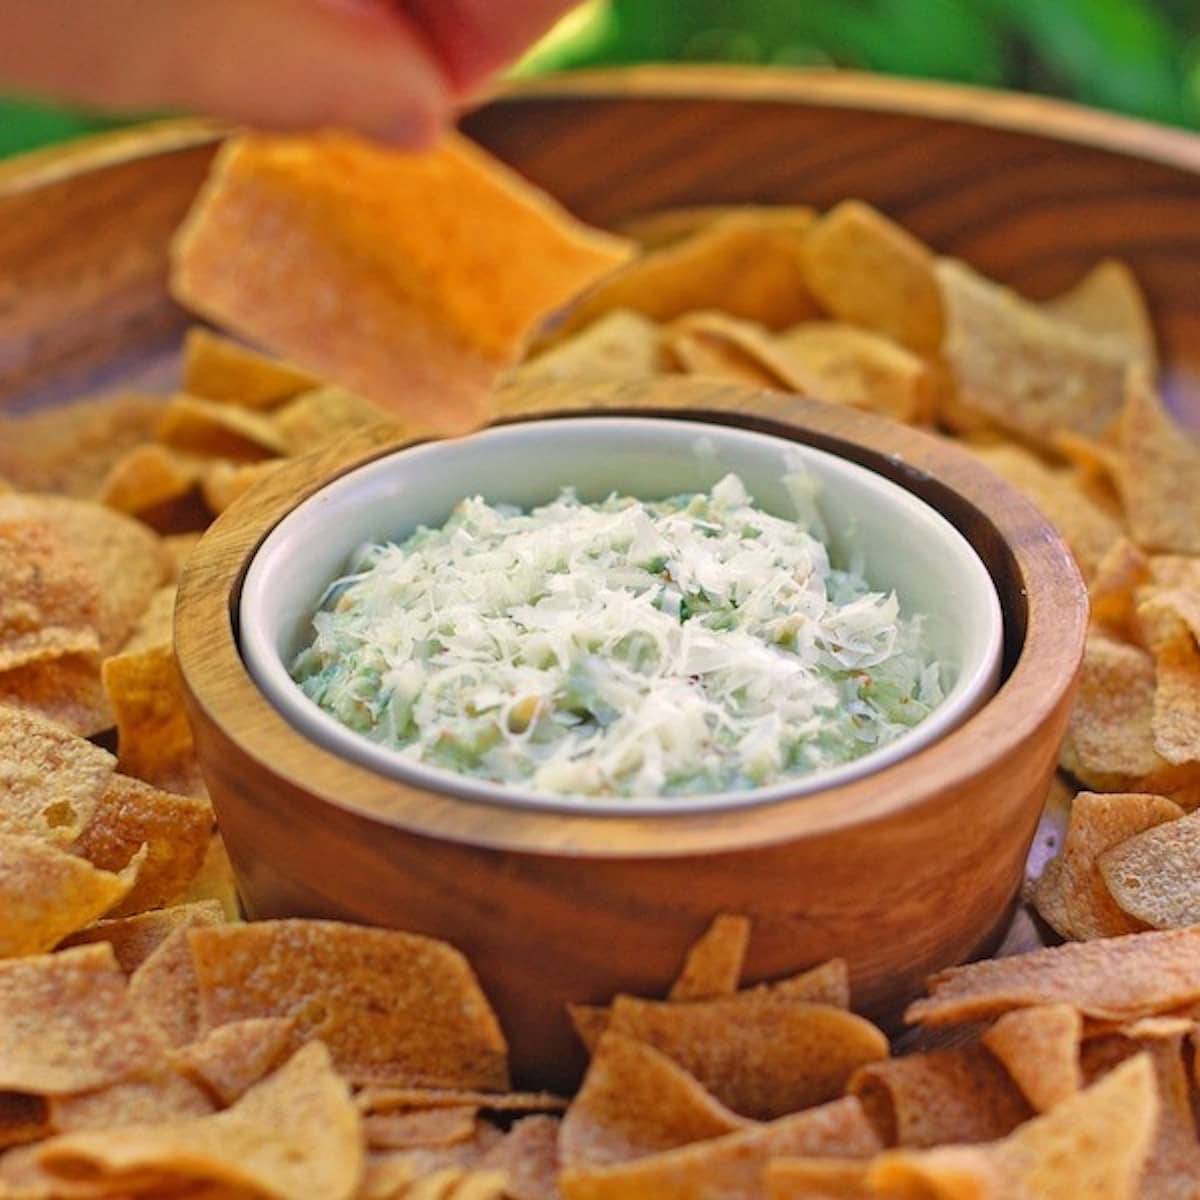 Creamy garlic scape dip with chips in a wooden serving bowl.